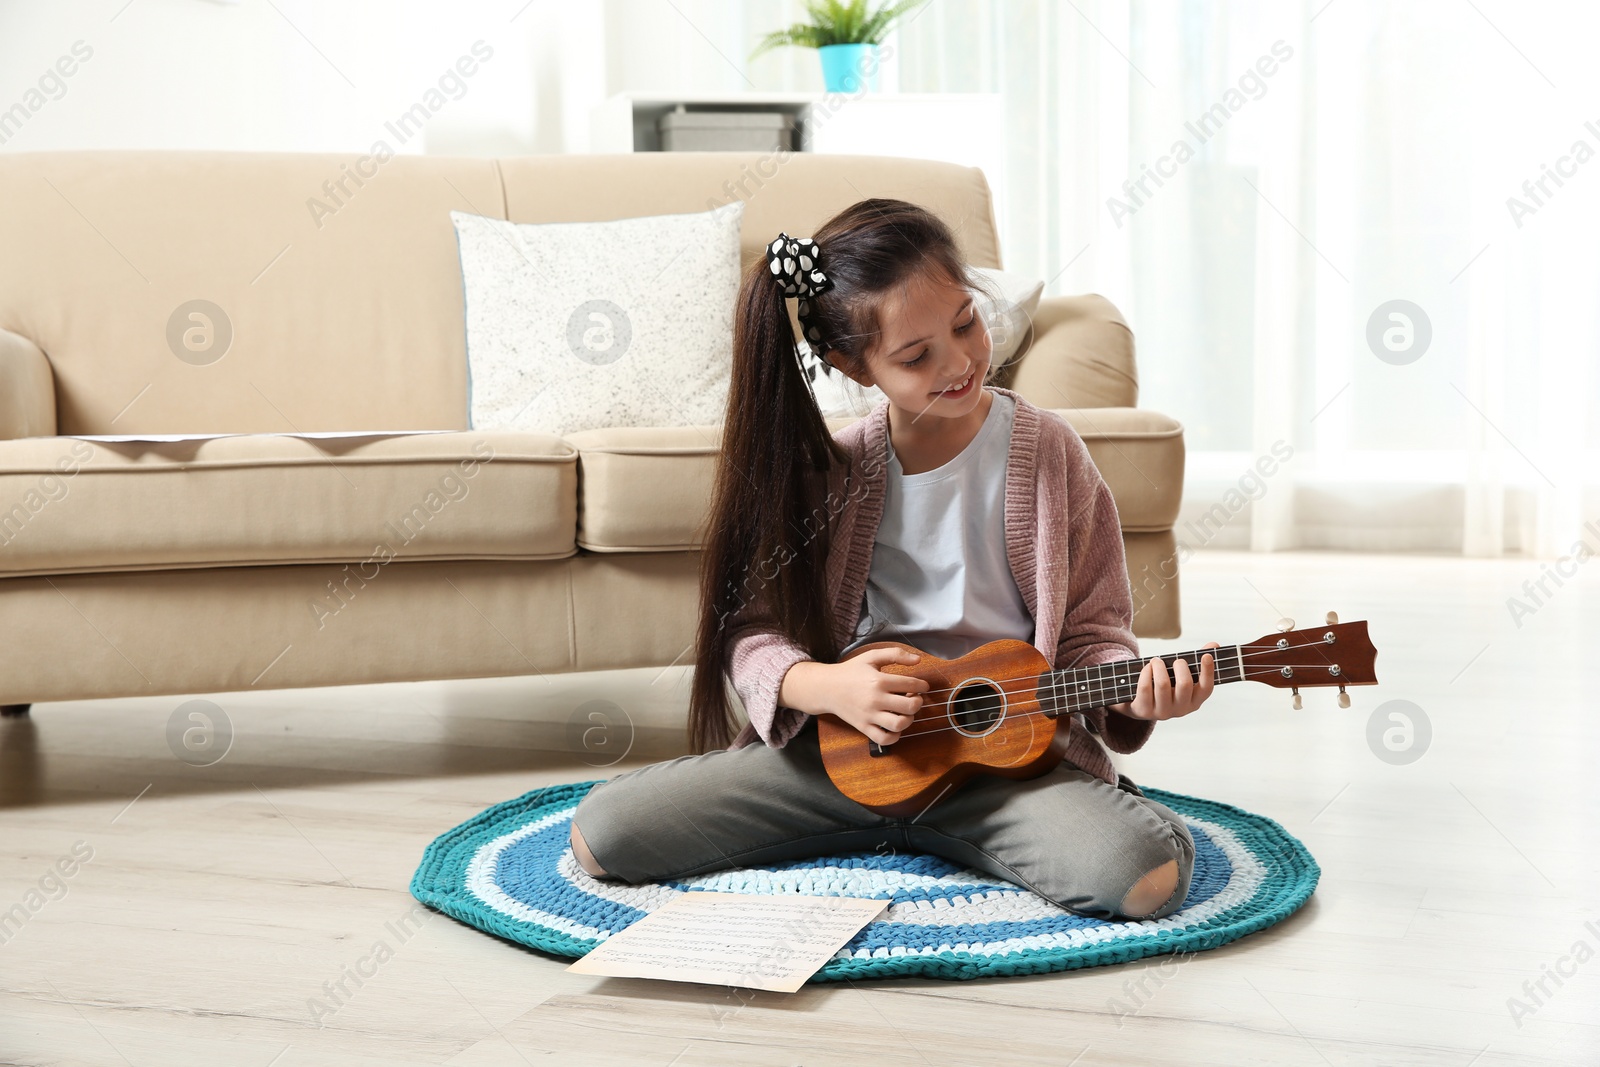 Photo of Cute little girl playing guitar on floor in room